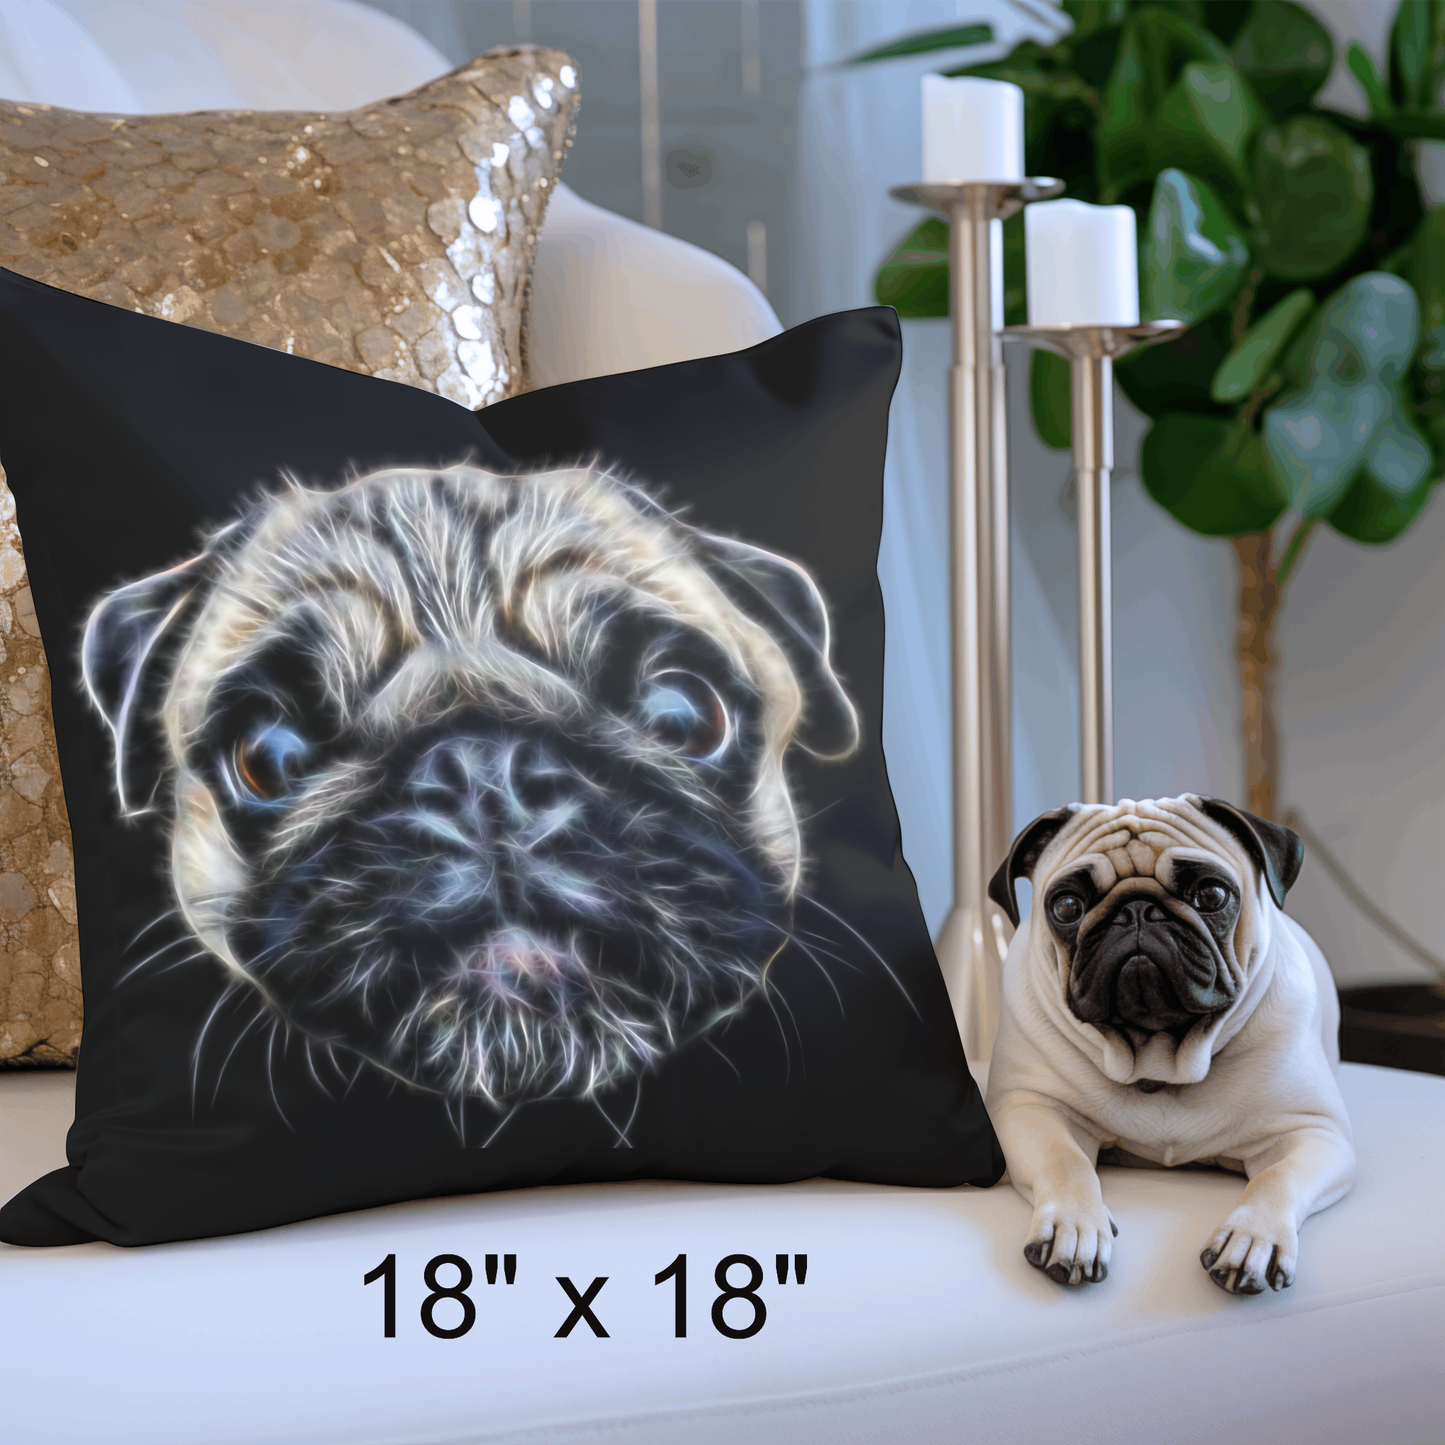 Chocolate and Tan Chihuahua Cushion with Pillow Insert